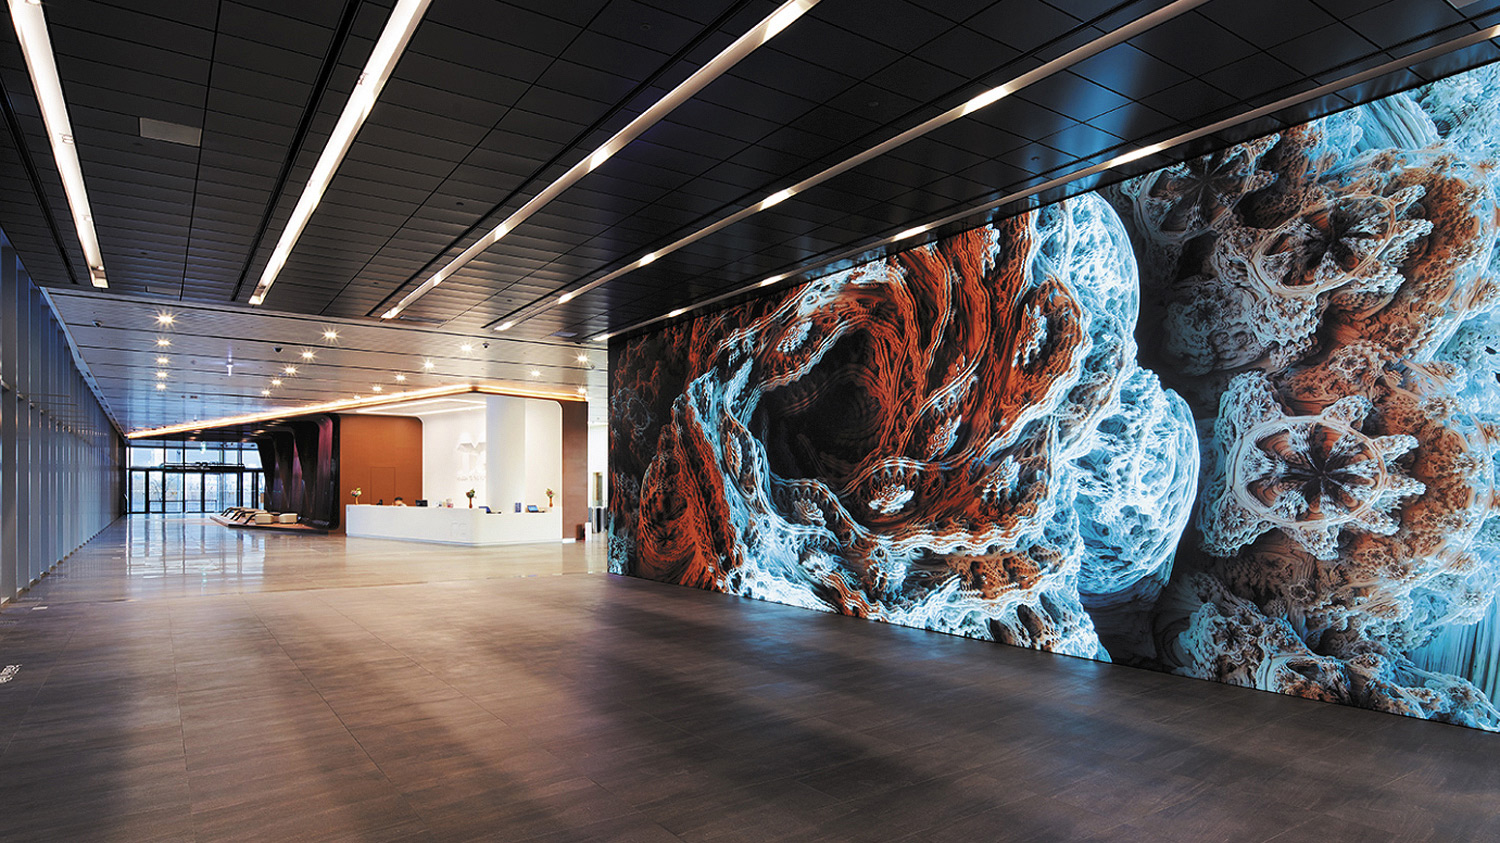 A digital signage covering one wall of the headquarters